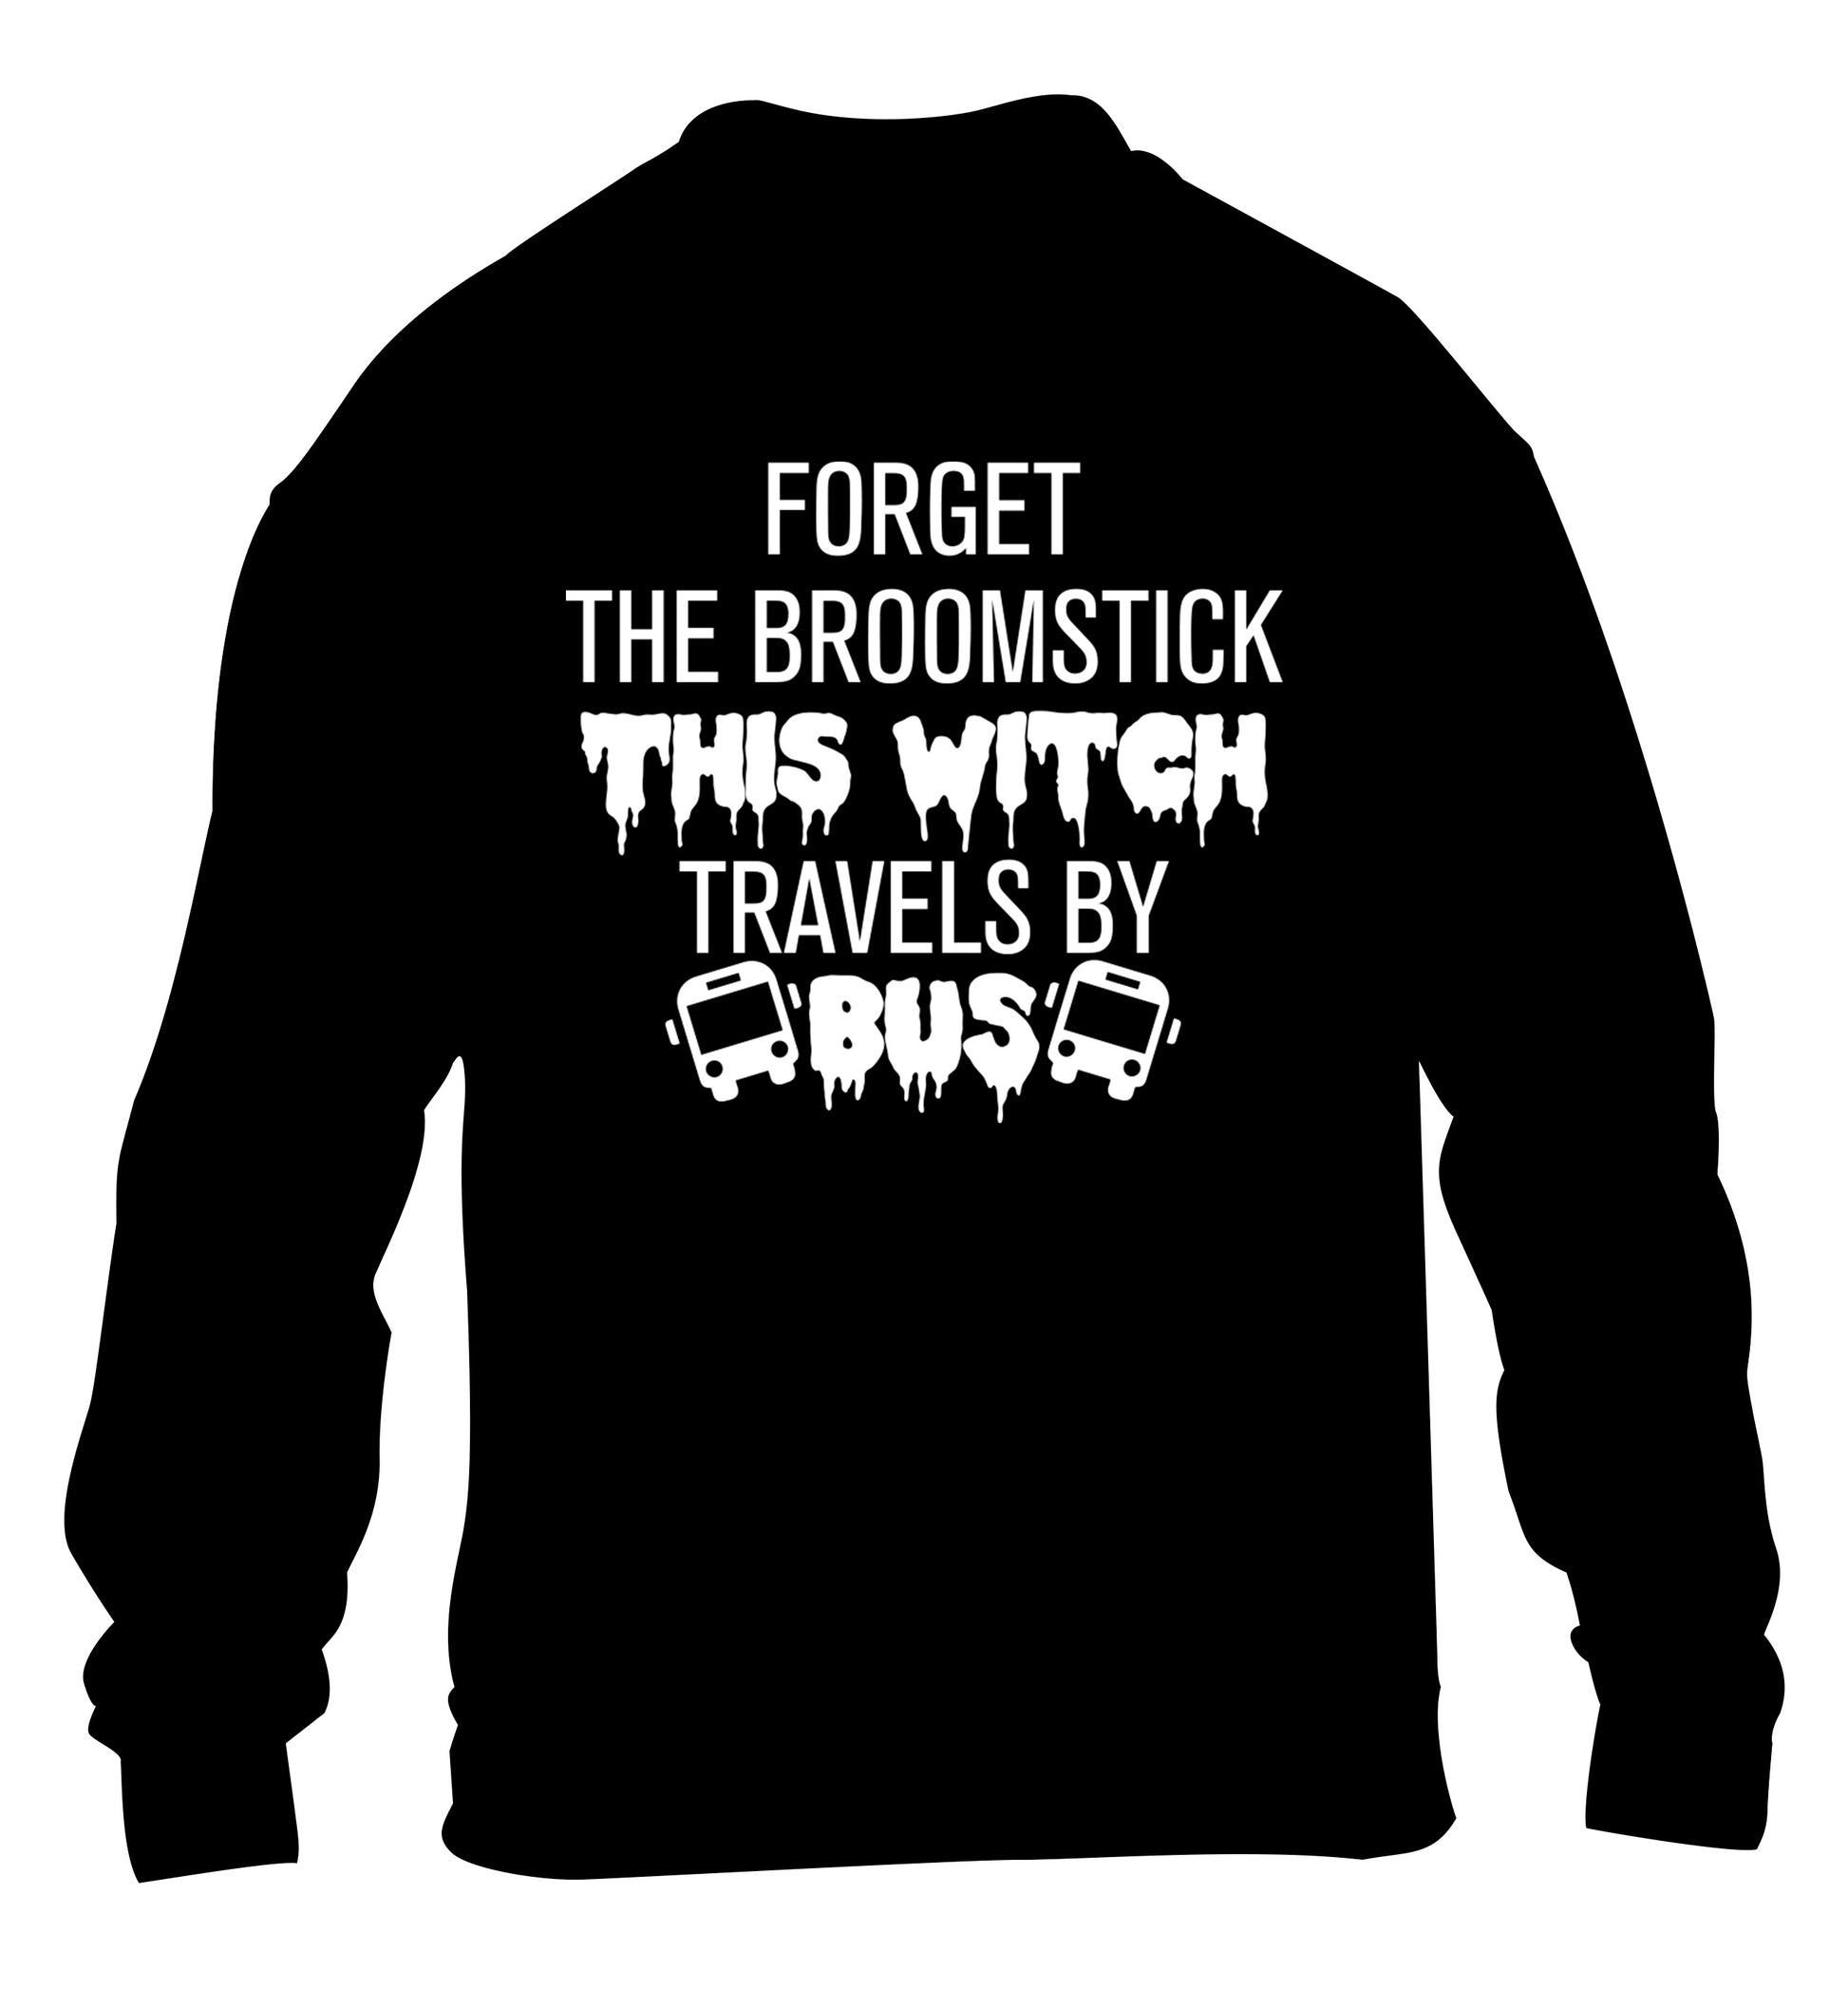 Forget the broomstick this witch travels by bus children's black sweater 12-14 Years